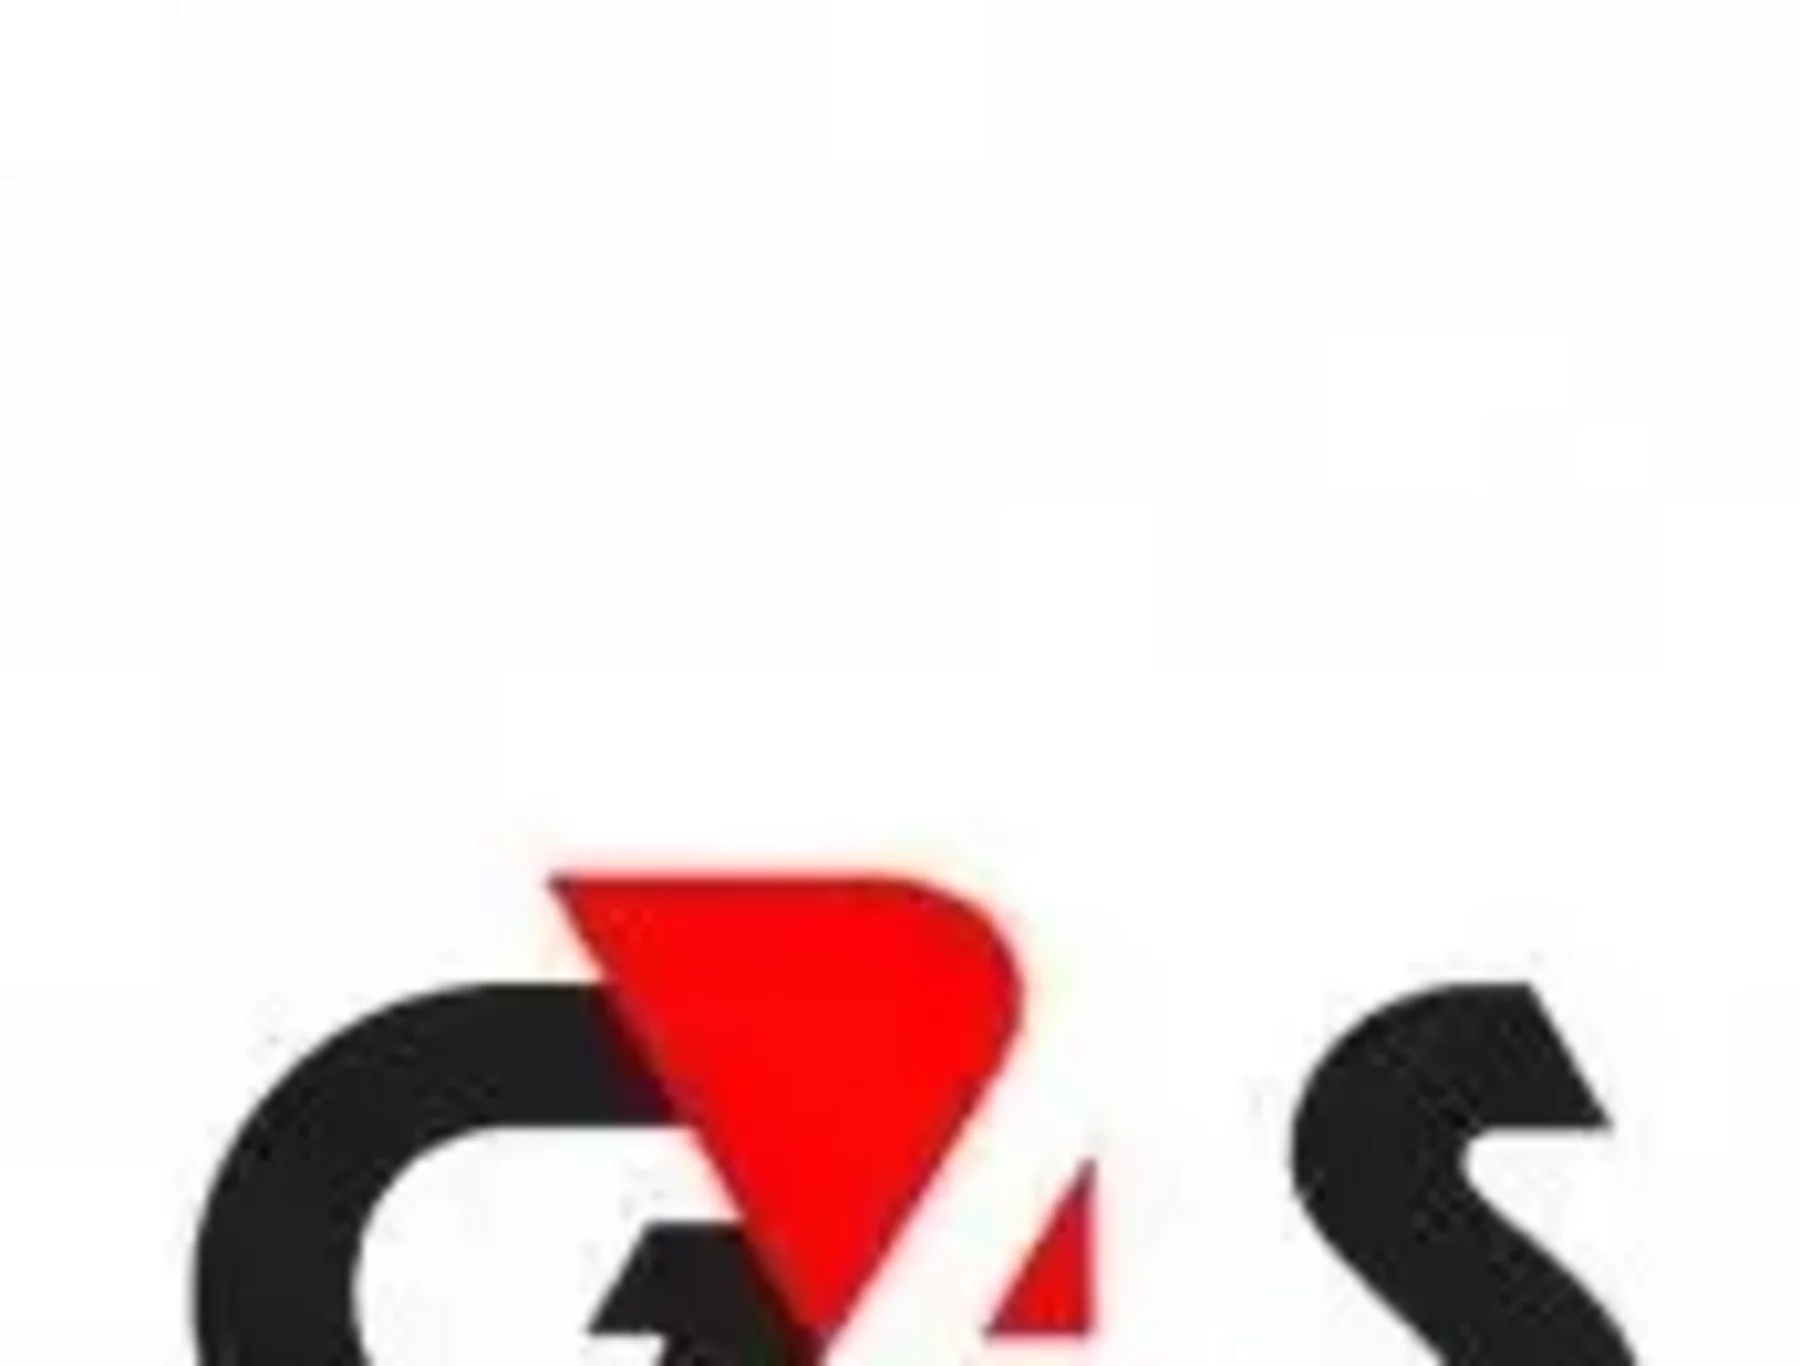 G4S Secure Solutions North America Compensation Employee Reviews |  Comparably